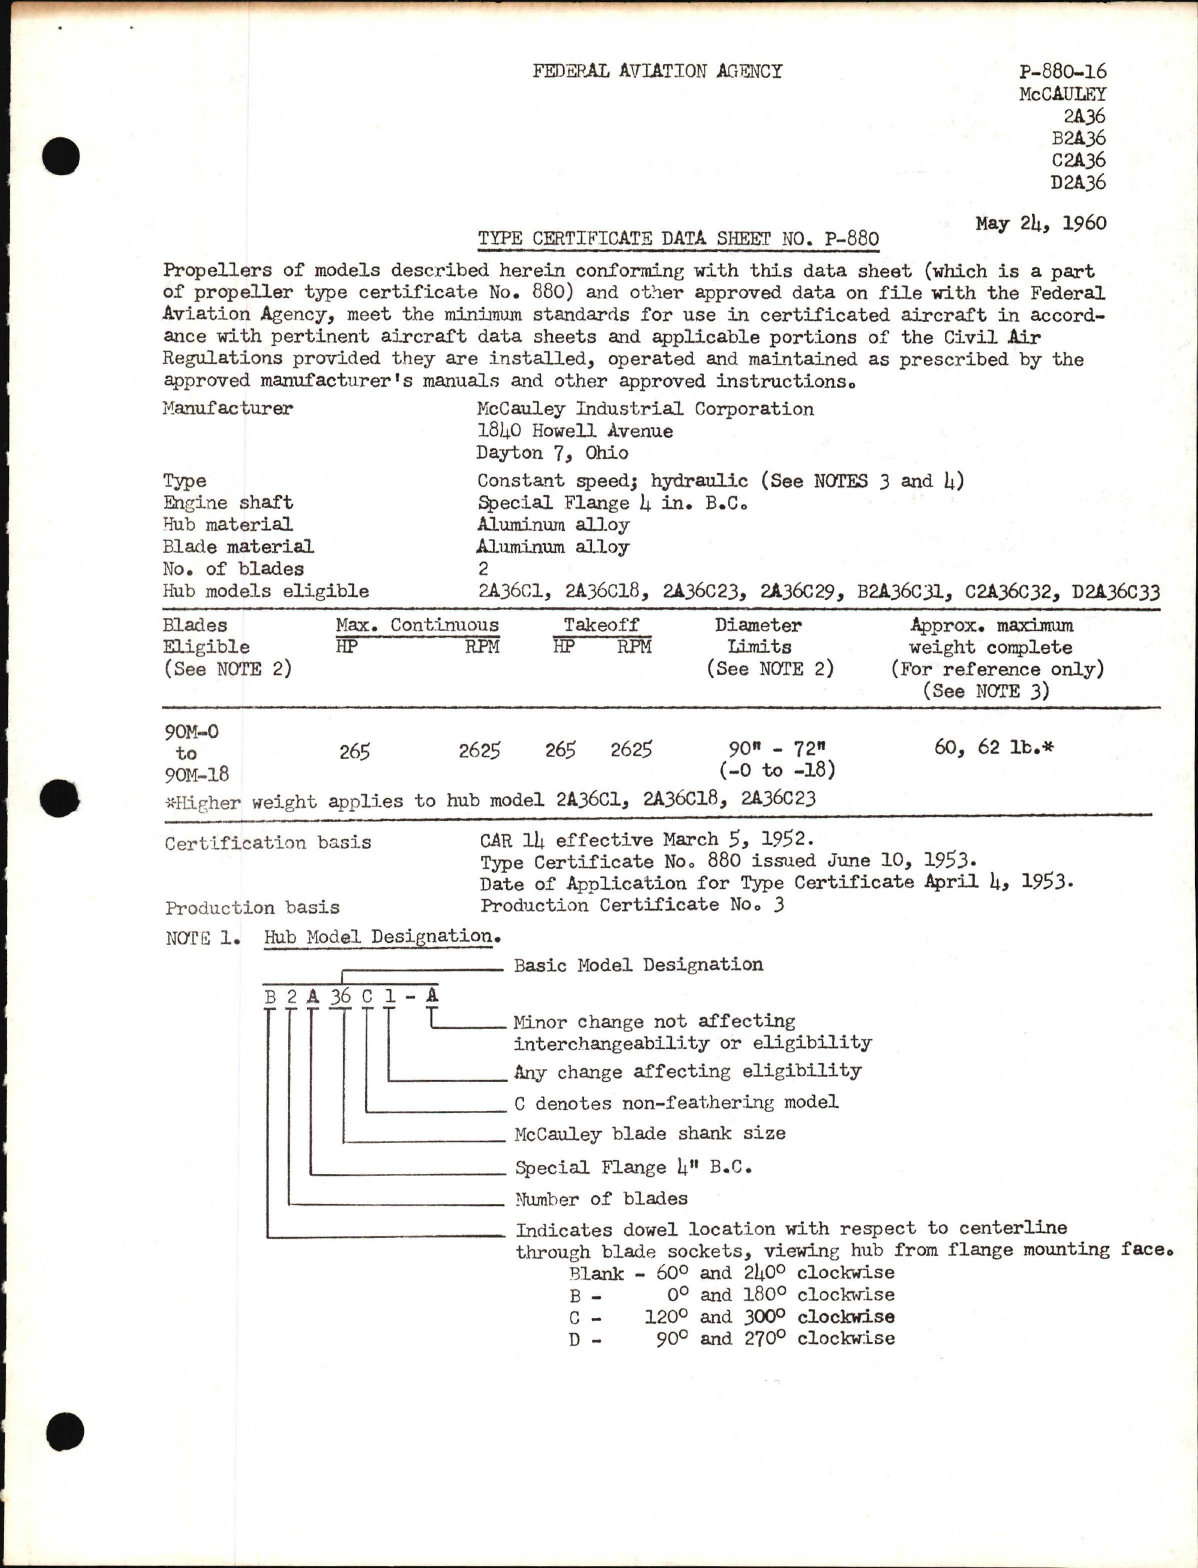 Sample page 1 from AirCorps Library document: 2A36, B2A36, C2A36, and D2A36 - Type Certificate 